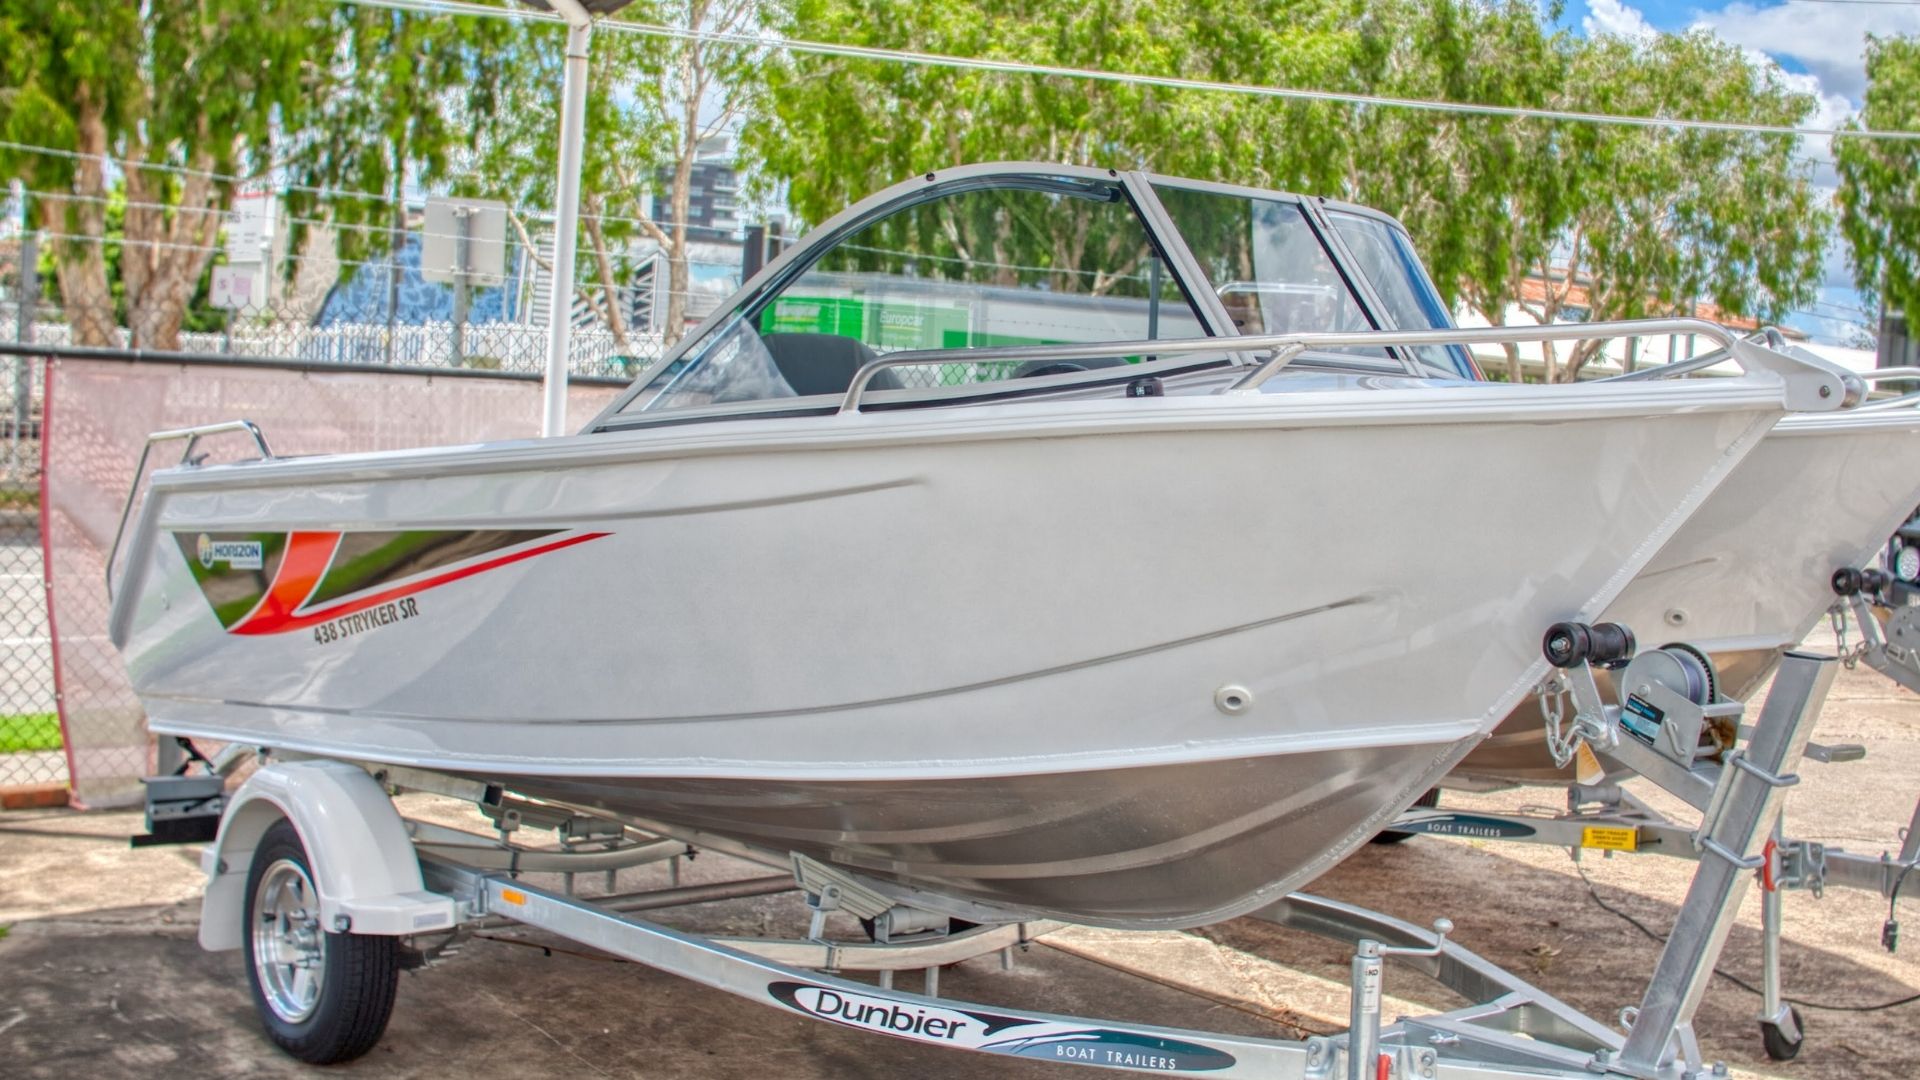 3 boats perfect for beginners & first boat owners